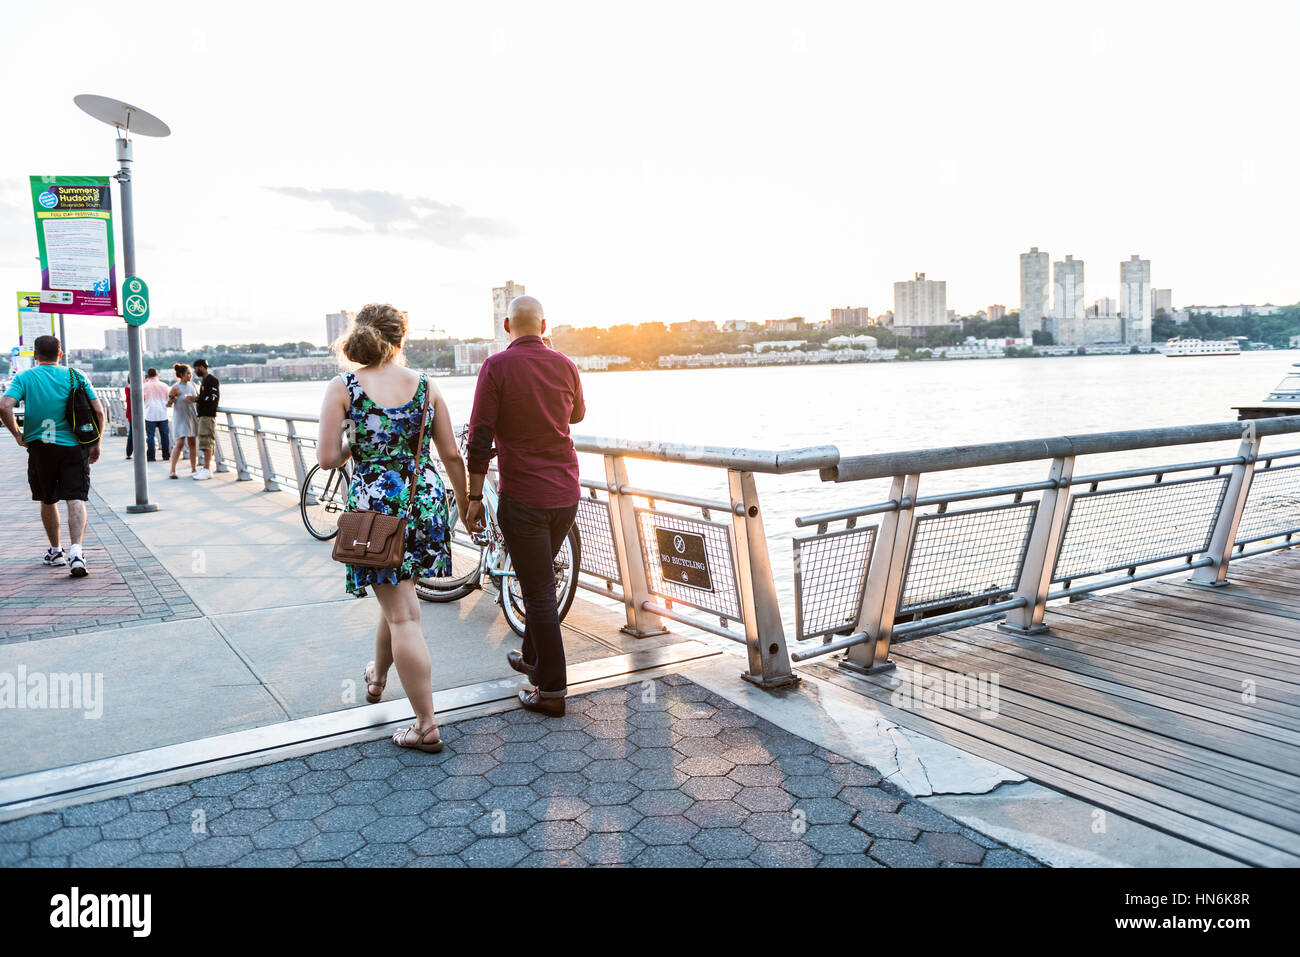 New York, USA - June 18, 2016: A couple walking down the boardwalk of riverside park pier 1 in New York City with view of New Jersey Stock Photo